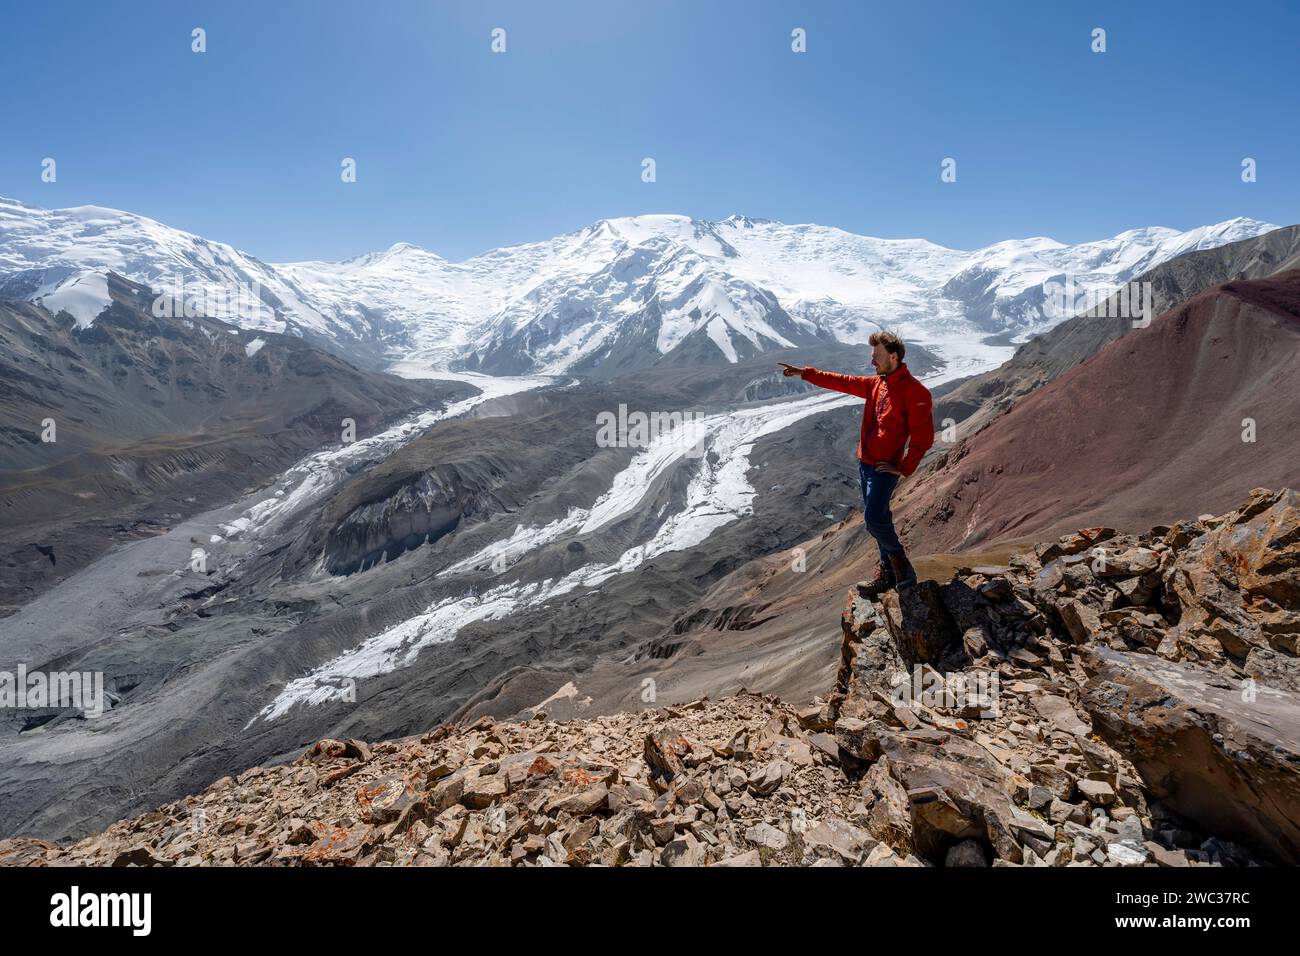 Mountaineer points into the distance, at Traveller's Pass with view of impressive mountain landscape, high mountain landscape with glacier moraines Stock Photo